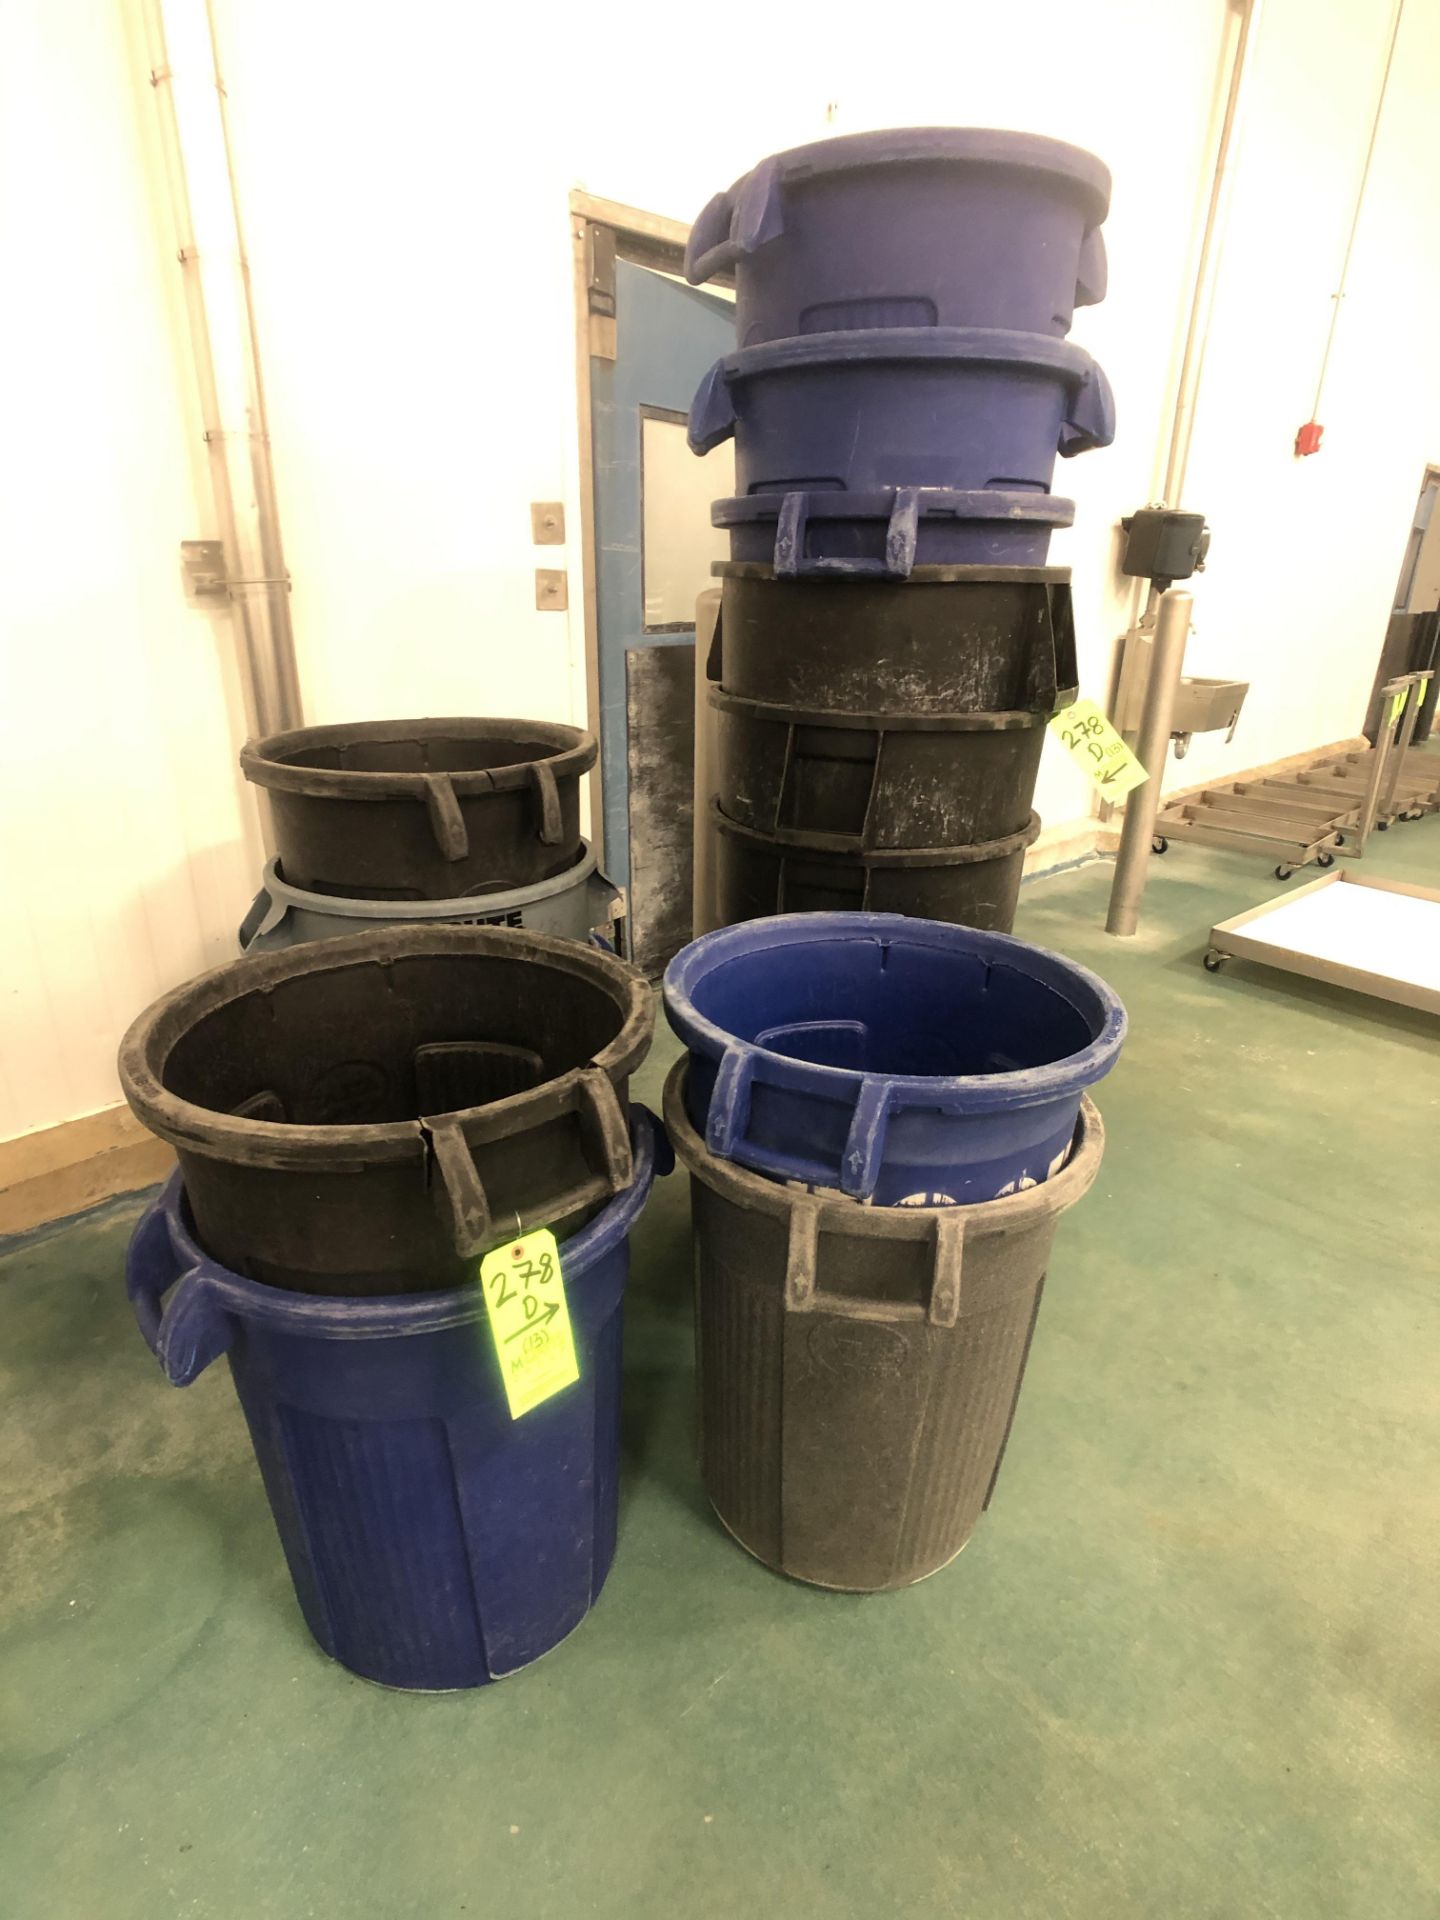 TRASH BINS APPX (13) VARIOUS SIZES WITH 1 DOLLY